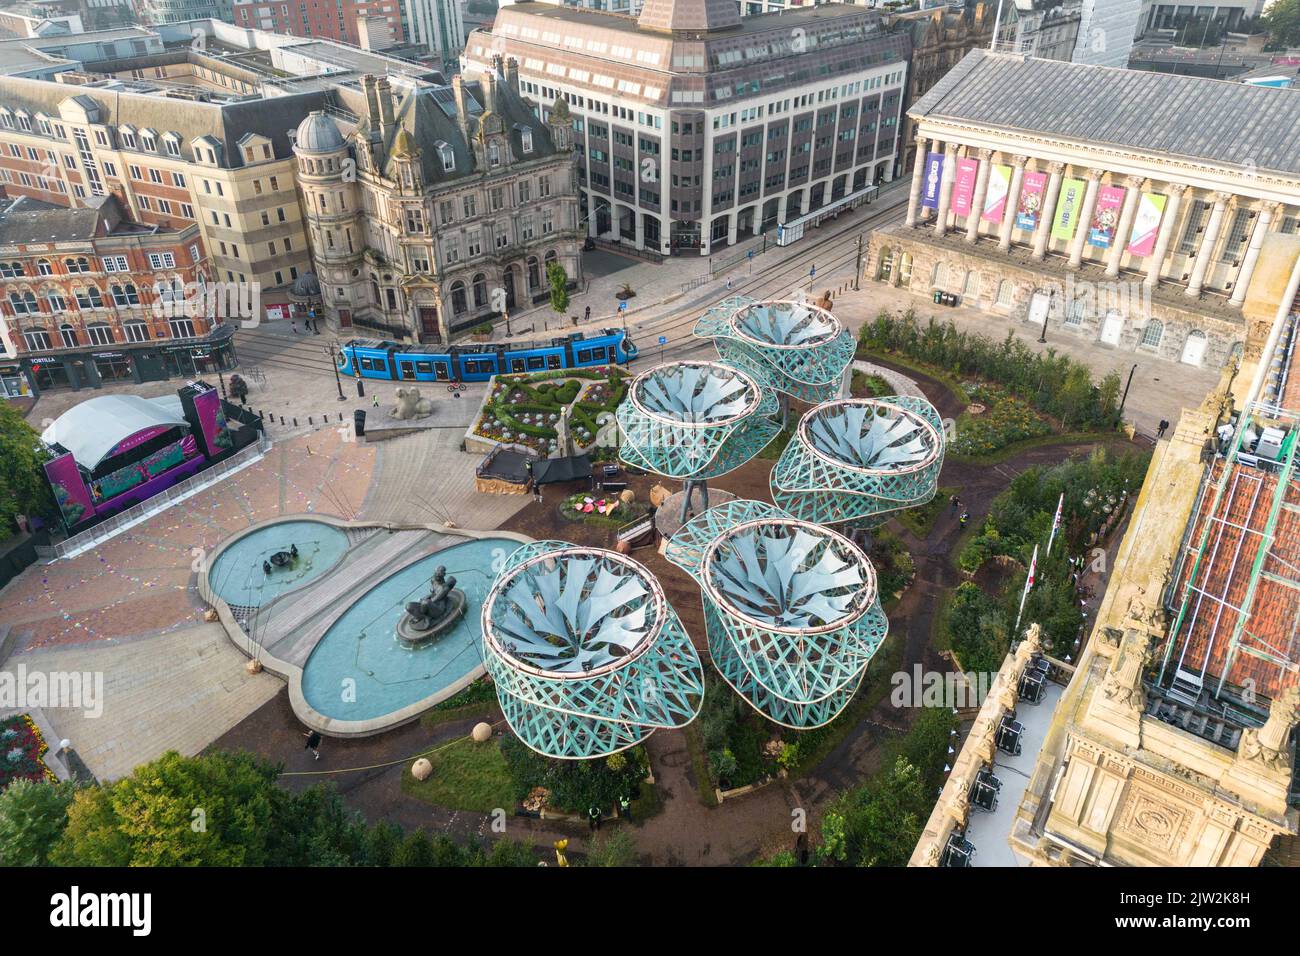 Victoria Square, Birmingham September 3rd 2022 - The Polinations installation in Birmingham's Victoria Square next to the Council House. The garden along with giant architectural trees have been created as part of the Birmingham 2022 Festival. On Saturday morning a yoga class brought in the morning sun through the mist to the sound of the 'Floozie in the Jacuzzi' fountain. Credit: Scott CM/Alamy Live News Stock Photo